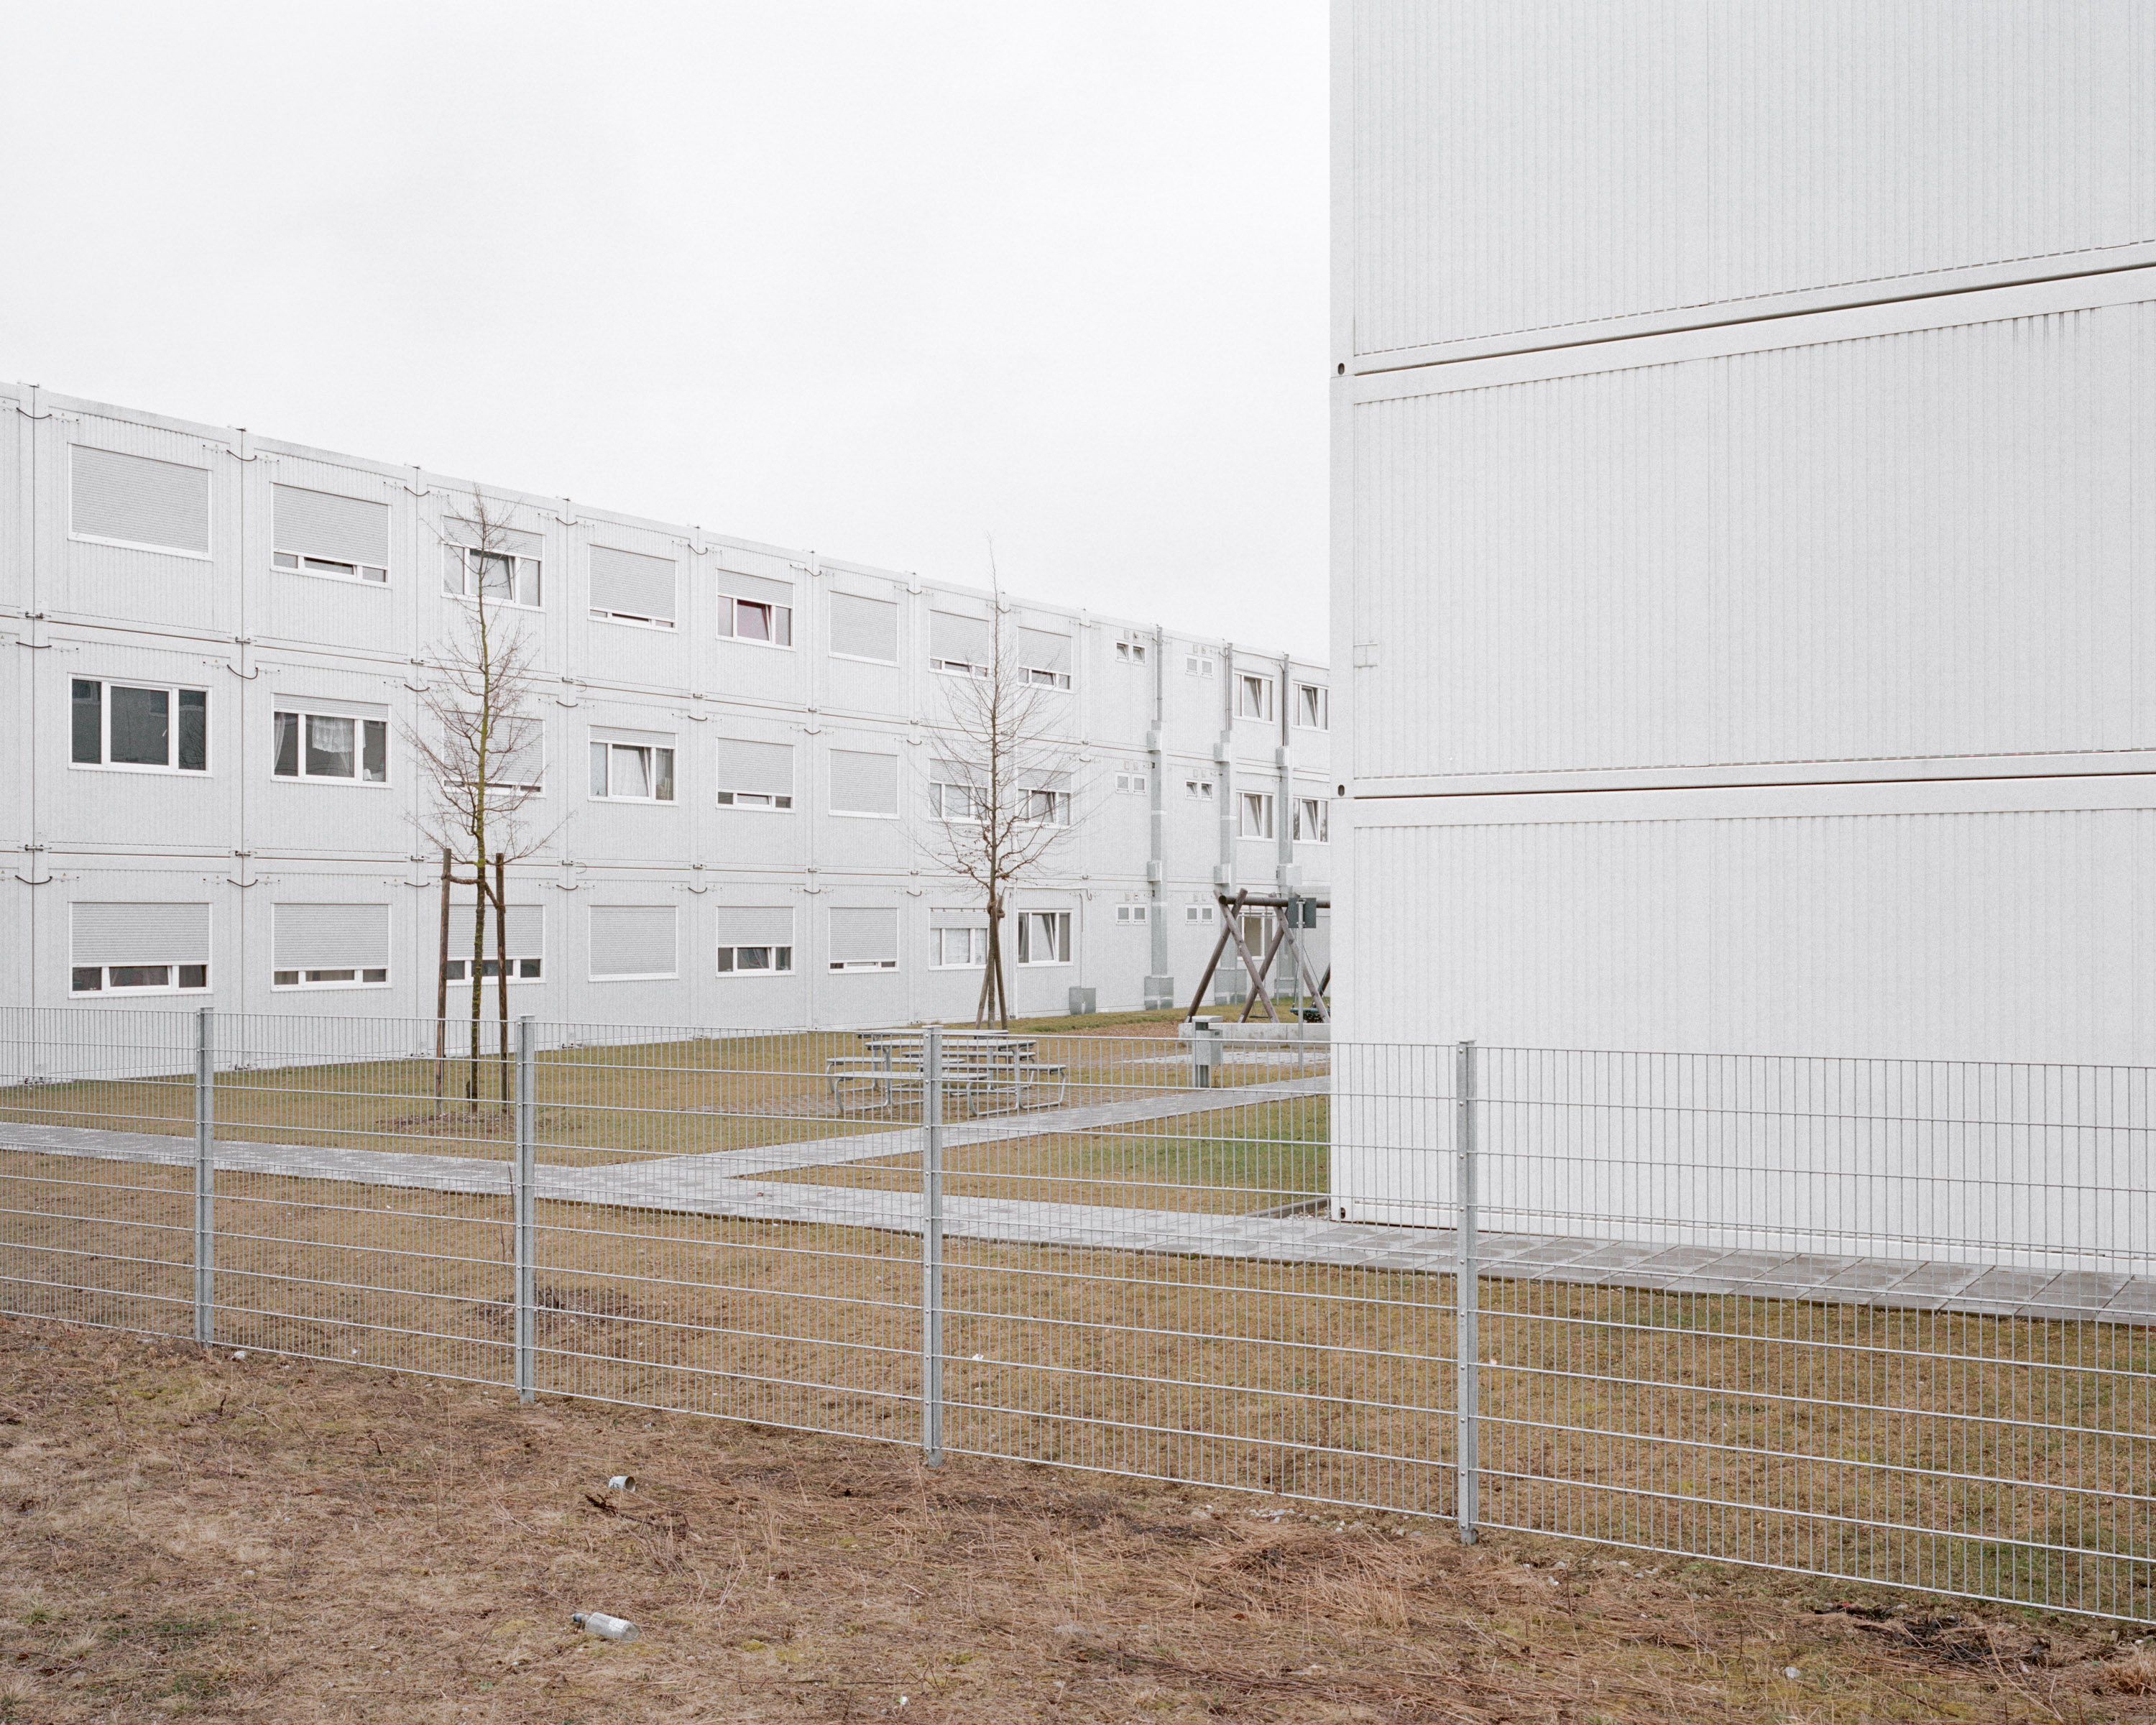 The picture shows the outside of an accommodation for refugees. You see a number of rather greyish buildings and a fence. Its a rather new building, with temporary character.